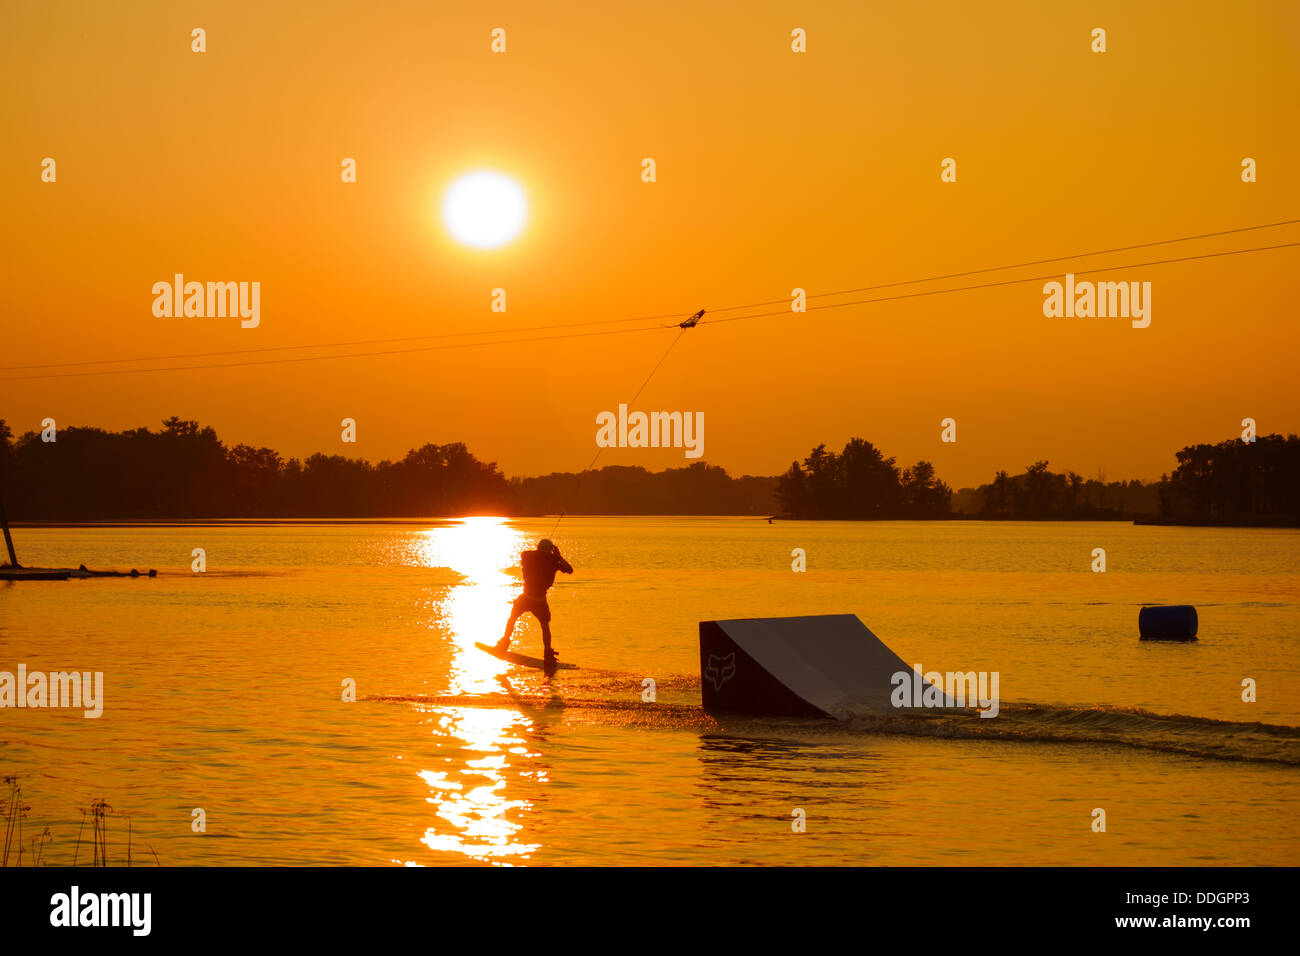 Silhouette of a man cable wakeboarding Stock Photo